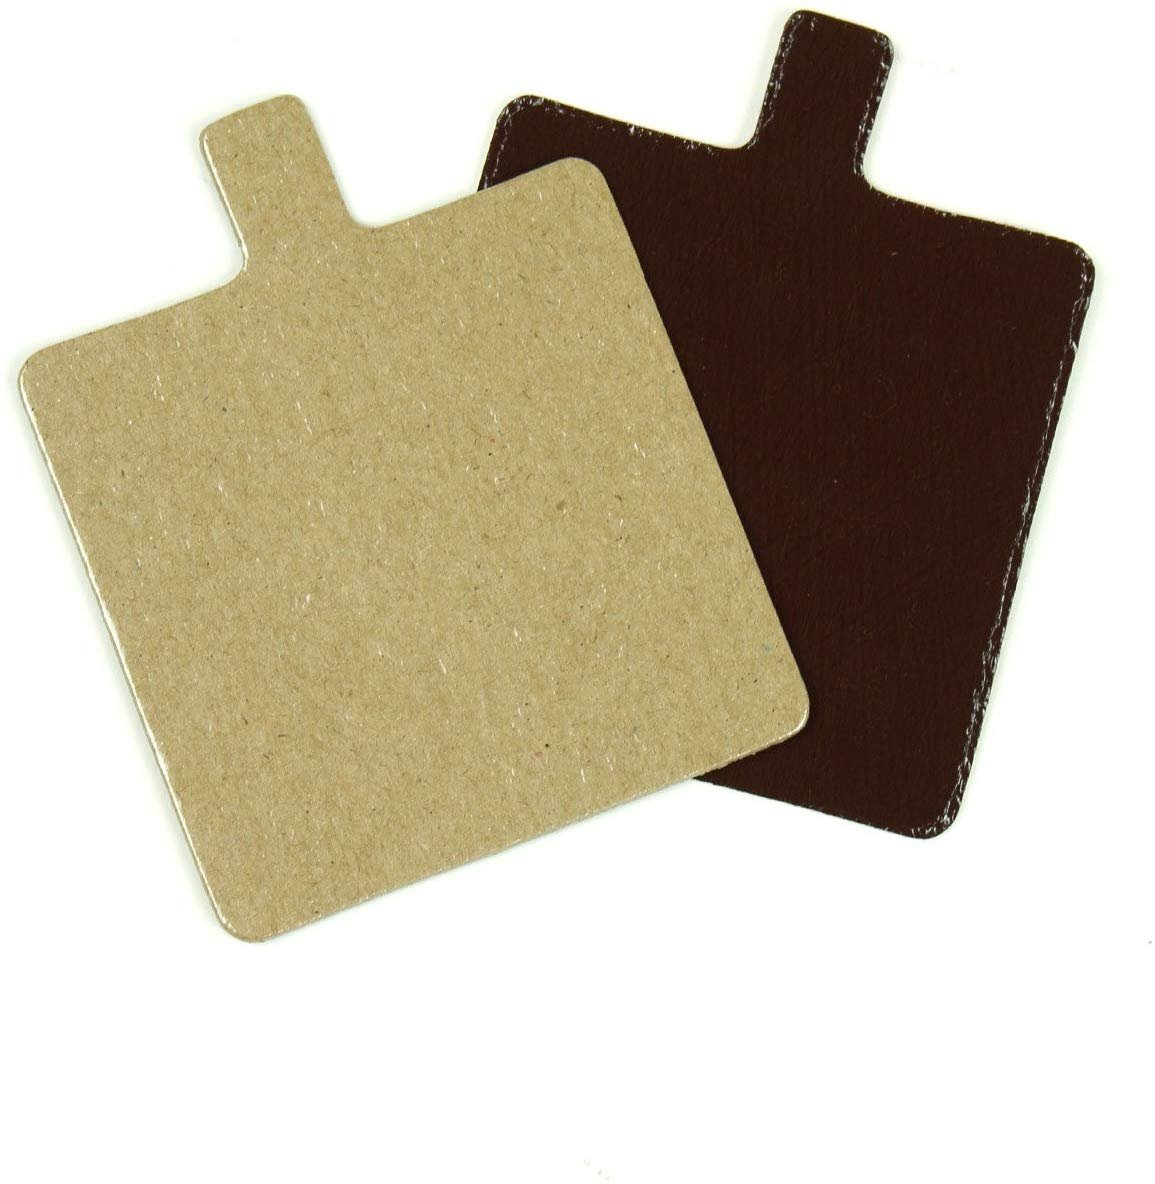 3-1//8 Inch Diameter Pack of 200 Round Pastry Board with Tab Chocolate and Praline